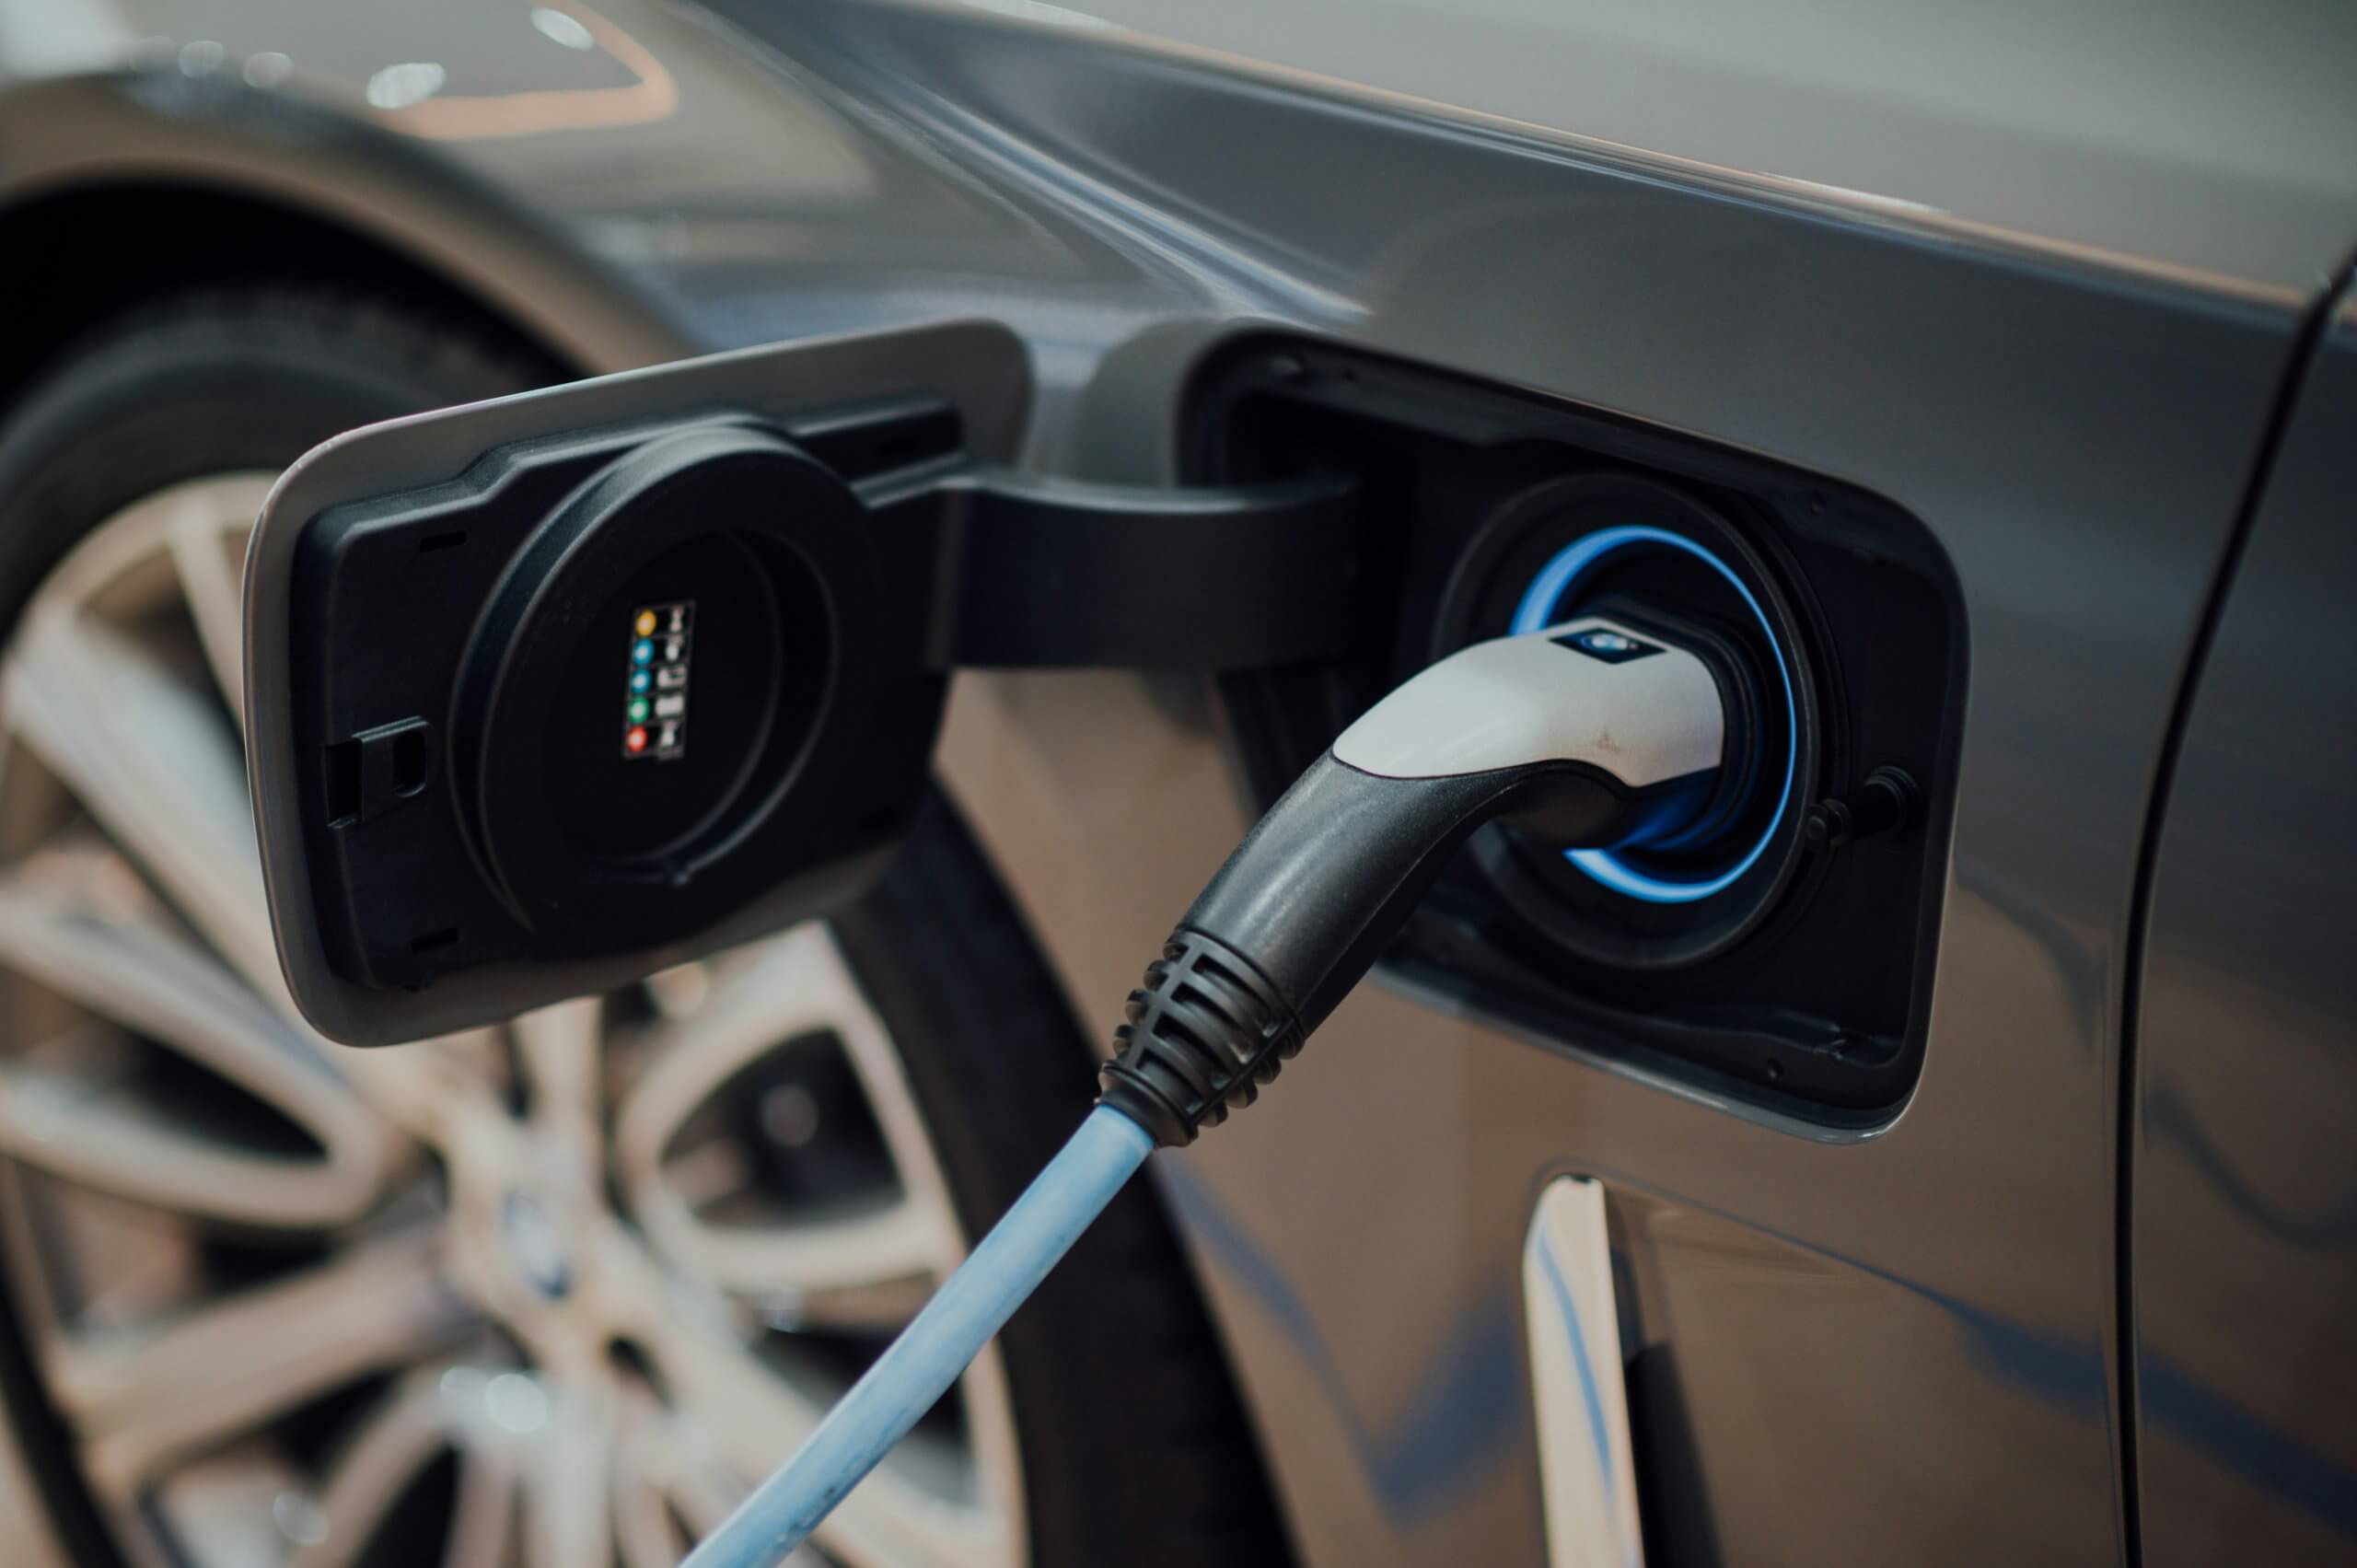 The Energy Performance of Buildings Directive mandates EV charging infrastructure for commercial buildings.